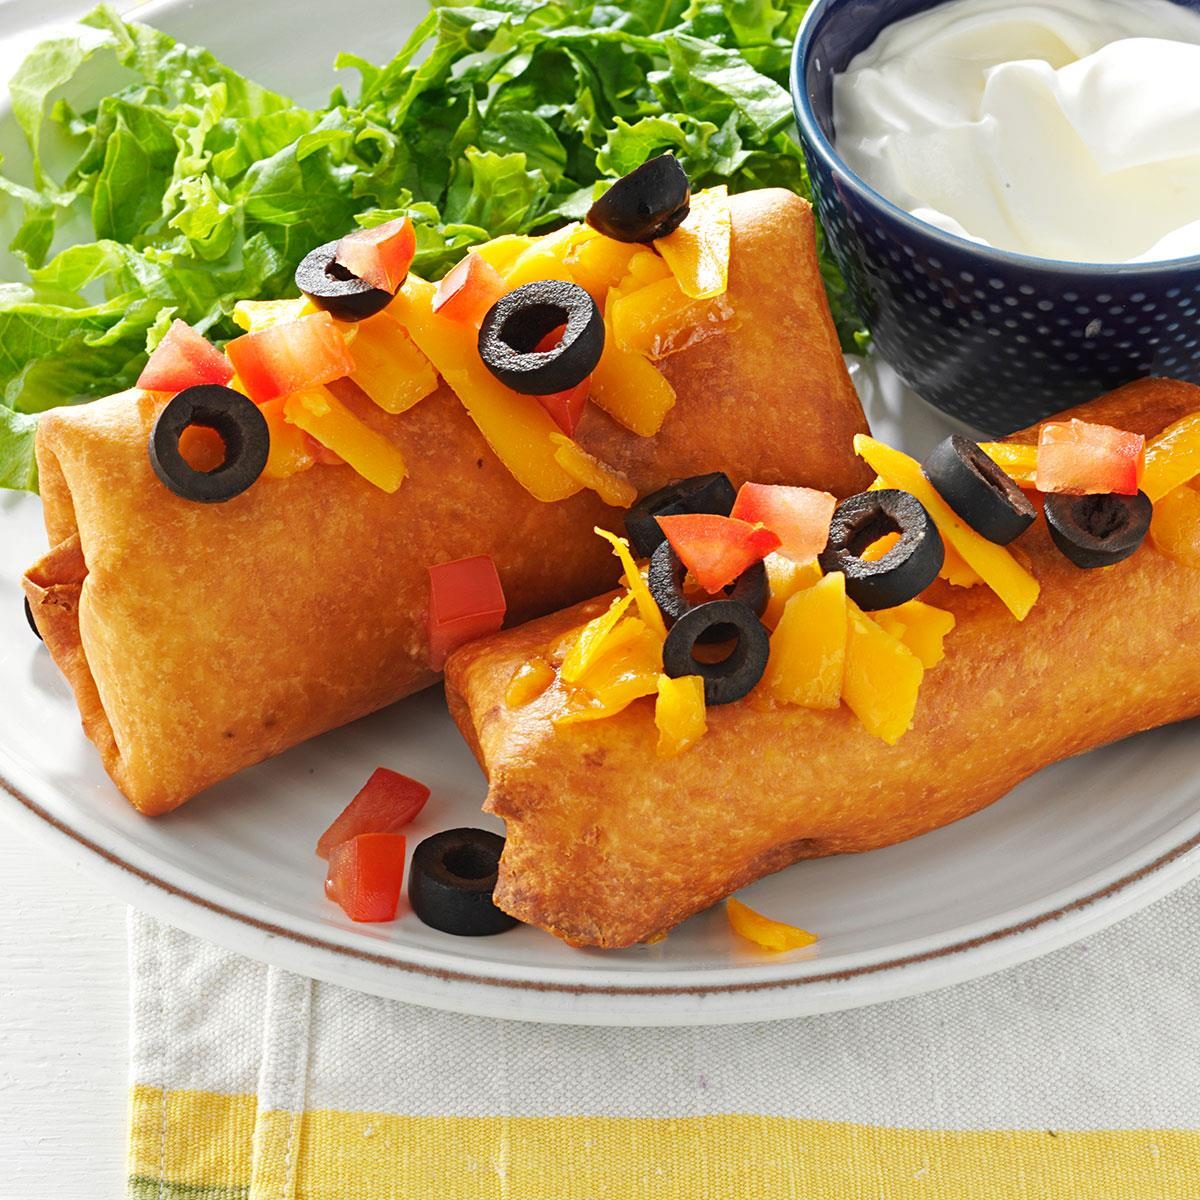 Beef Chimichangas Recipe: How to Make It